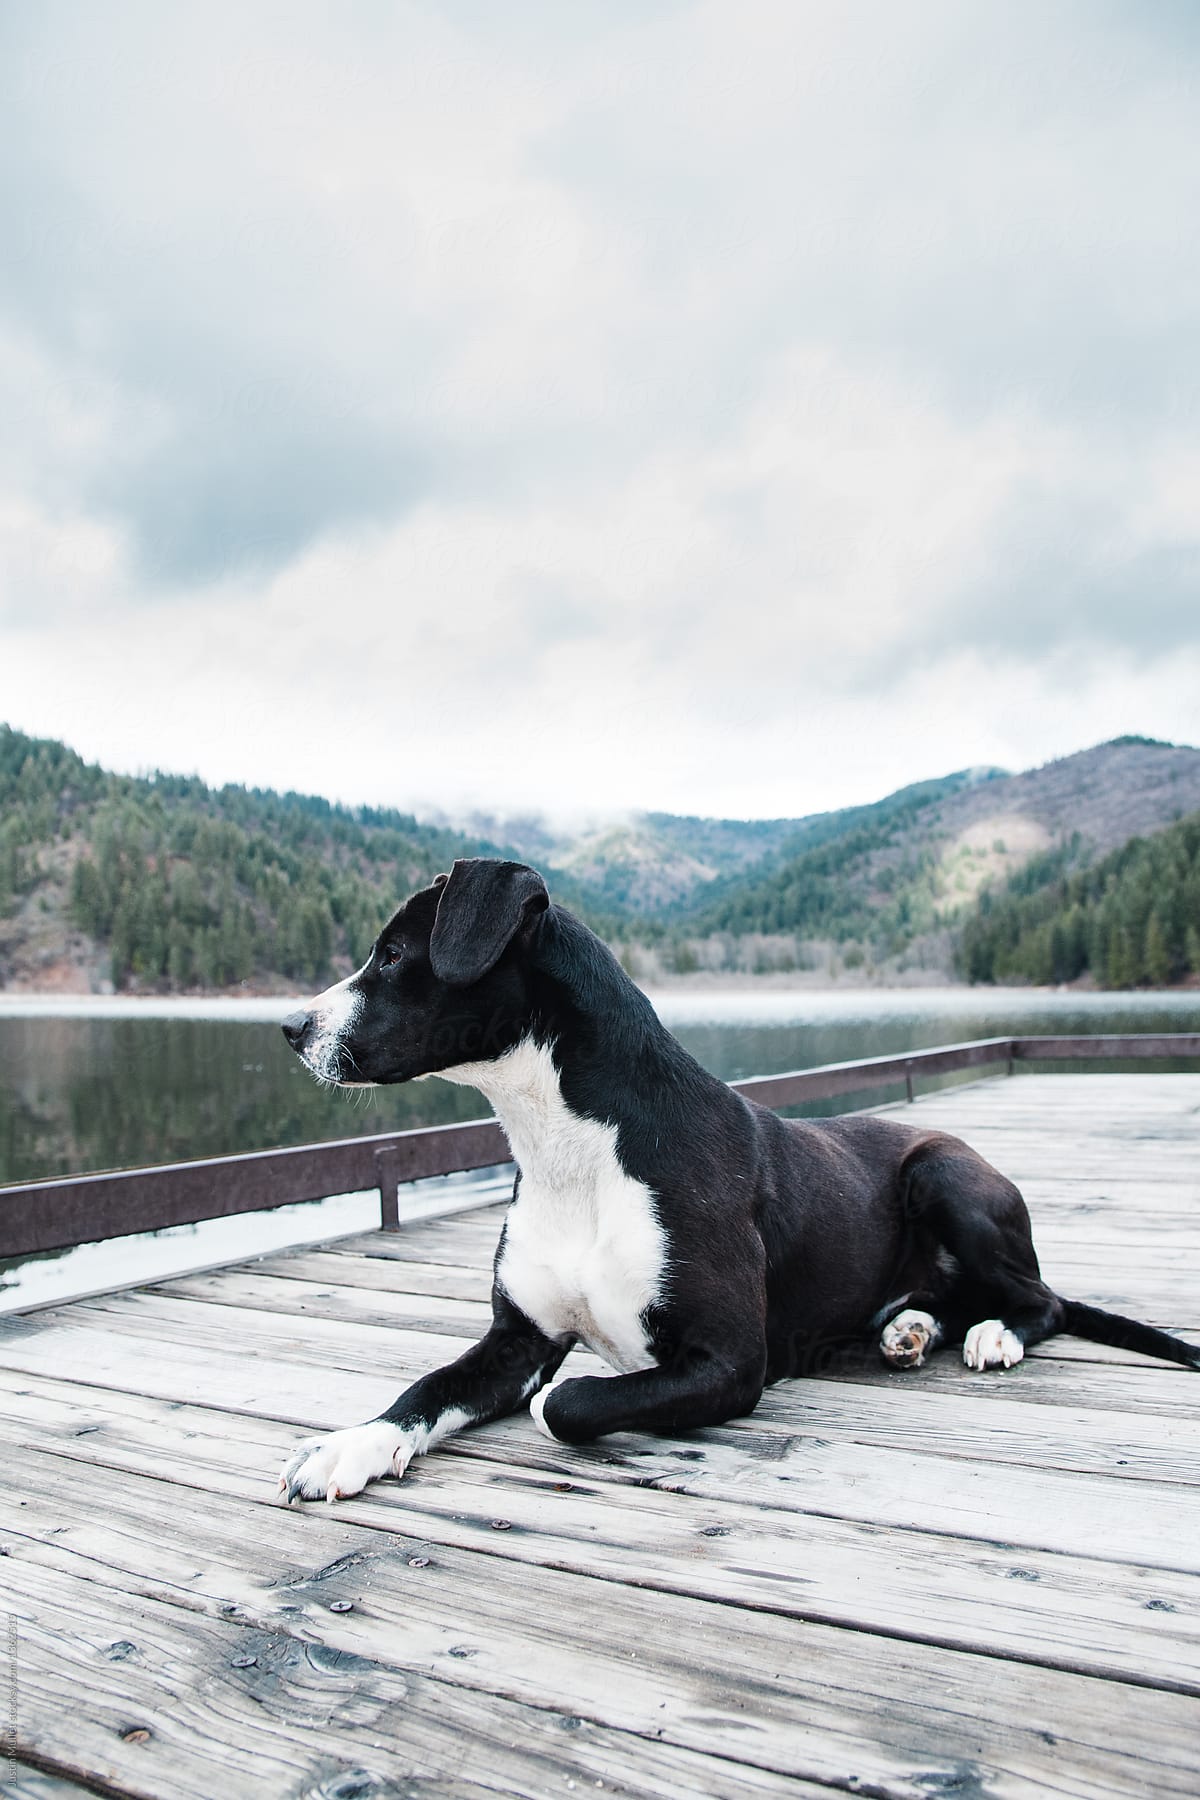 Healthy young dog relaxing by a lake.